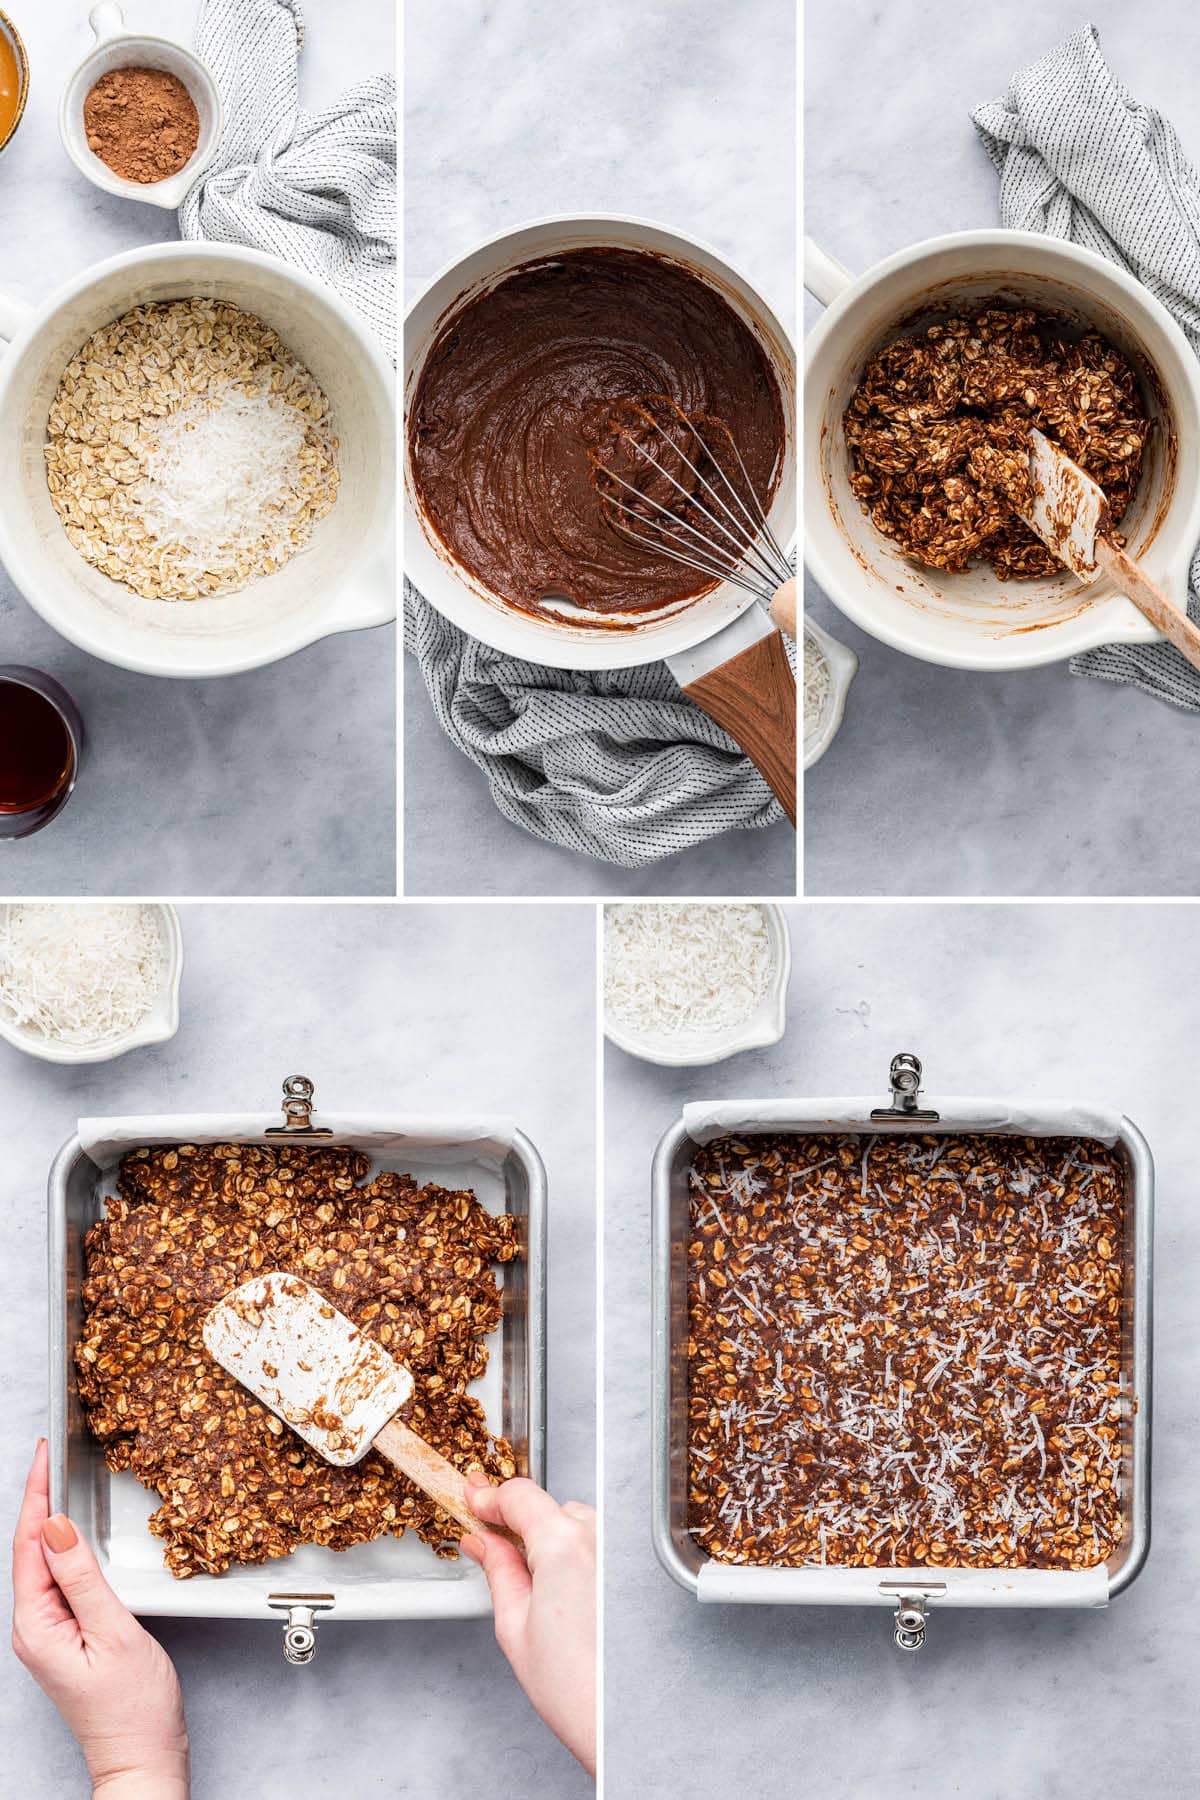 Collage of five photos showing how to make Healthy No Bake Chocolate Coconut Bars: making the mixture and then setting in a pan and topping with coconut.